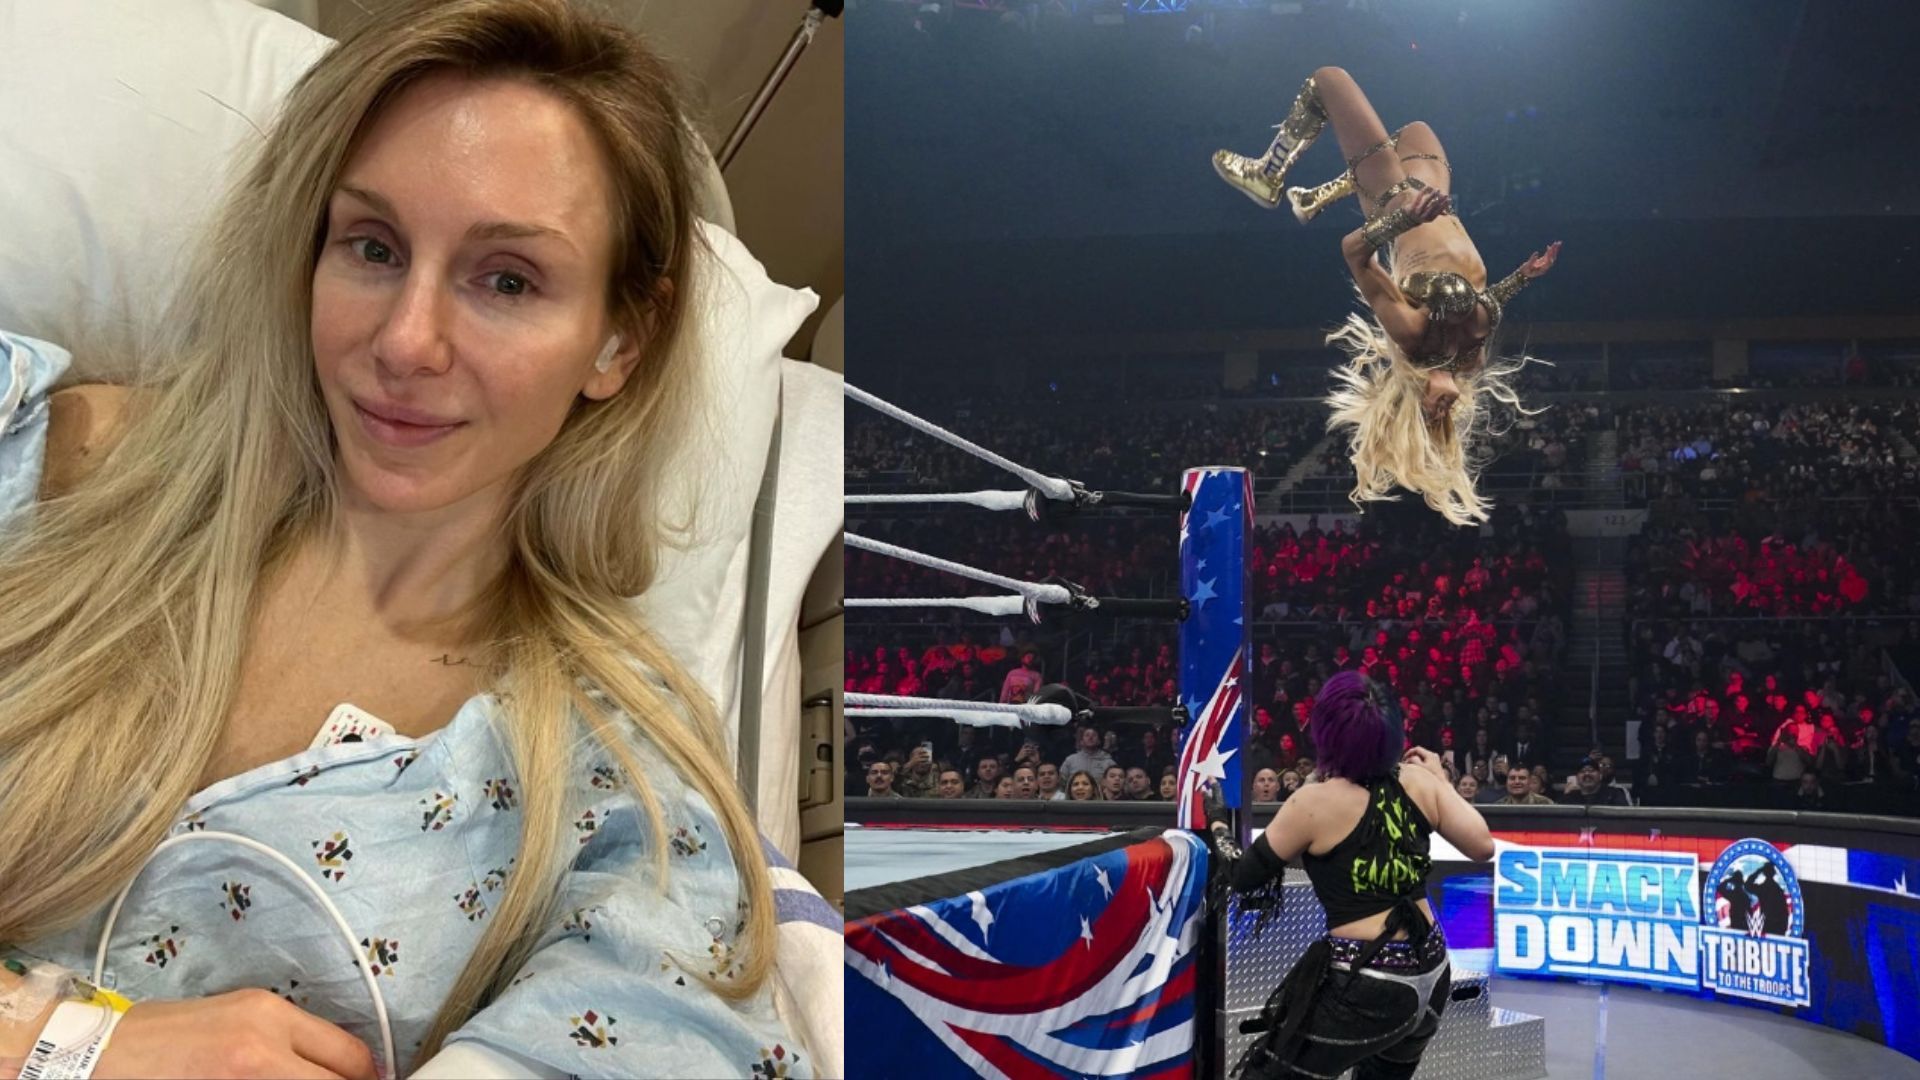 Charlotte Flair got injured during her match against Asuka